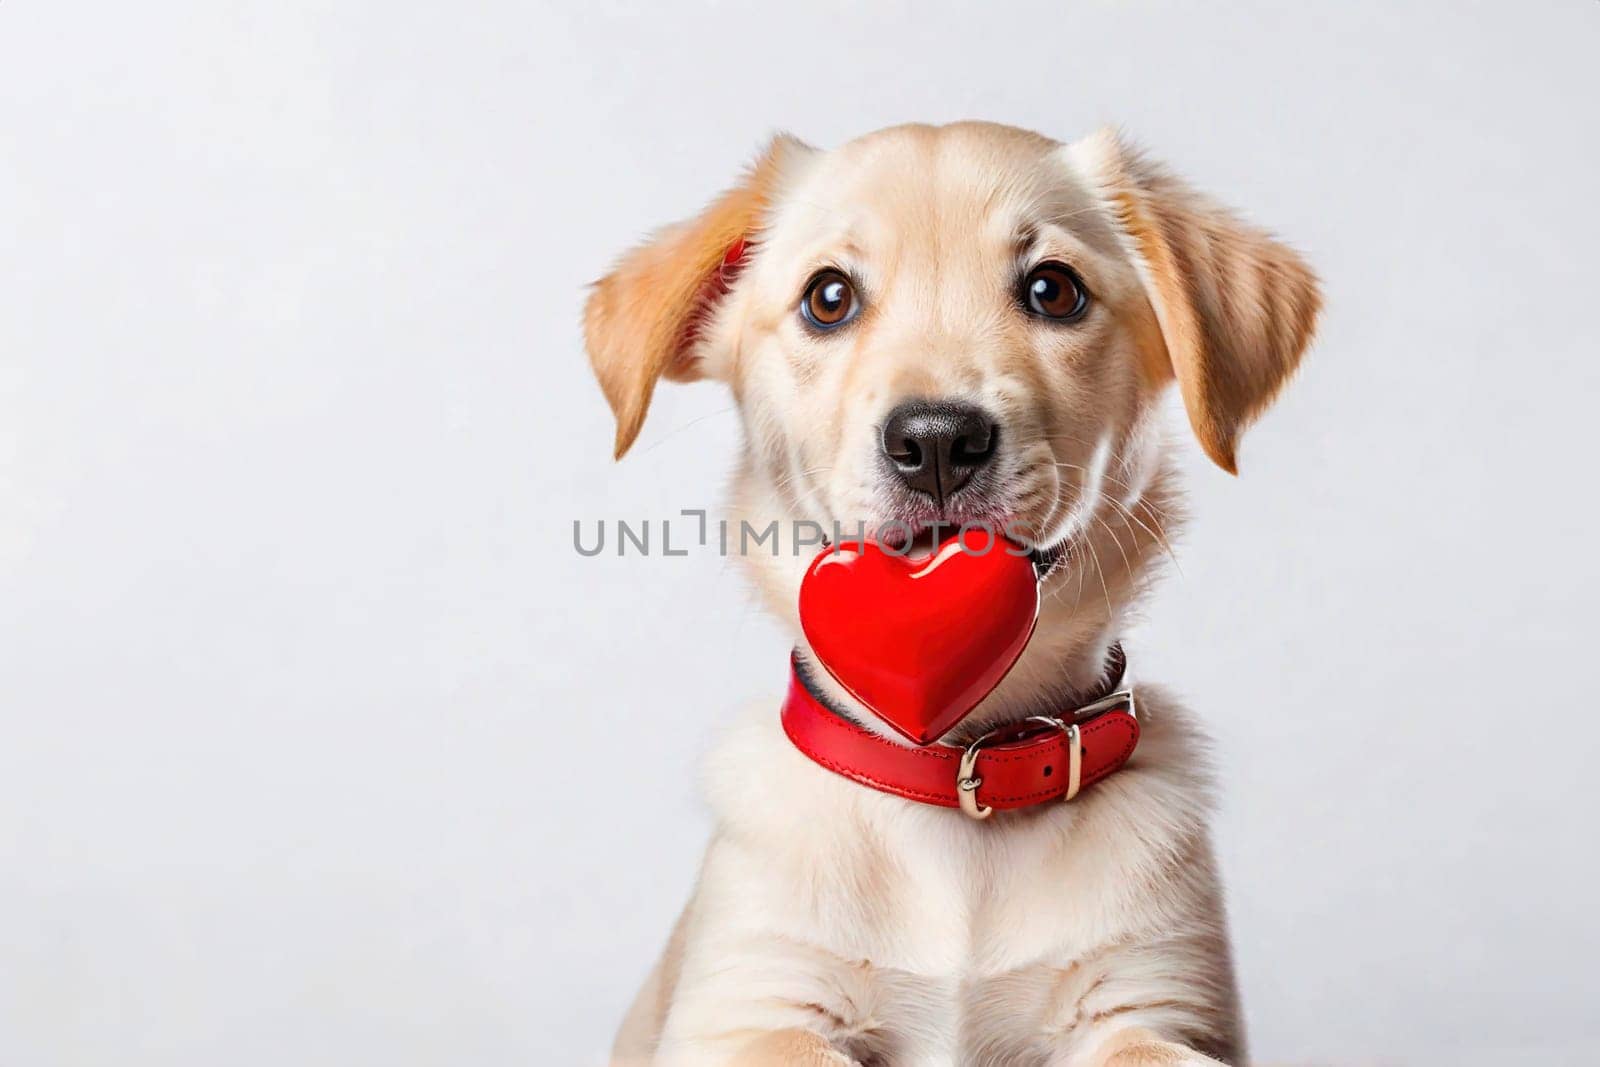 Cute portrait dog sitting and looking at camera with red heart in its mouth by EkaterinaPereslavtseva